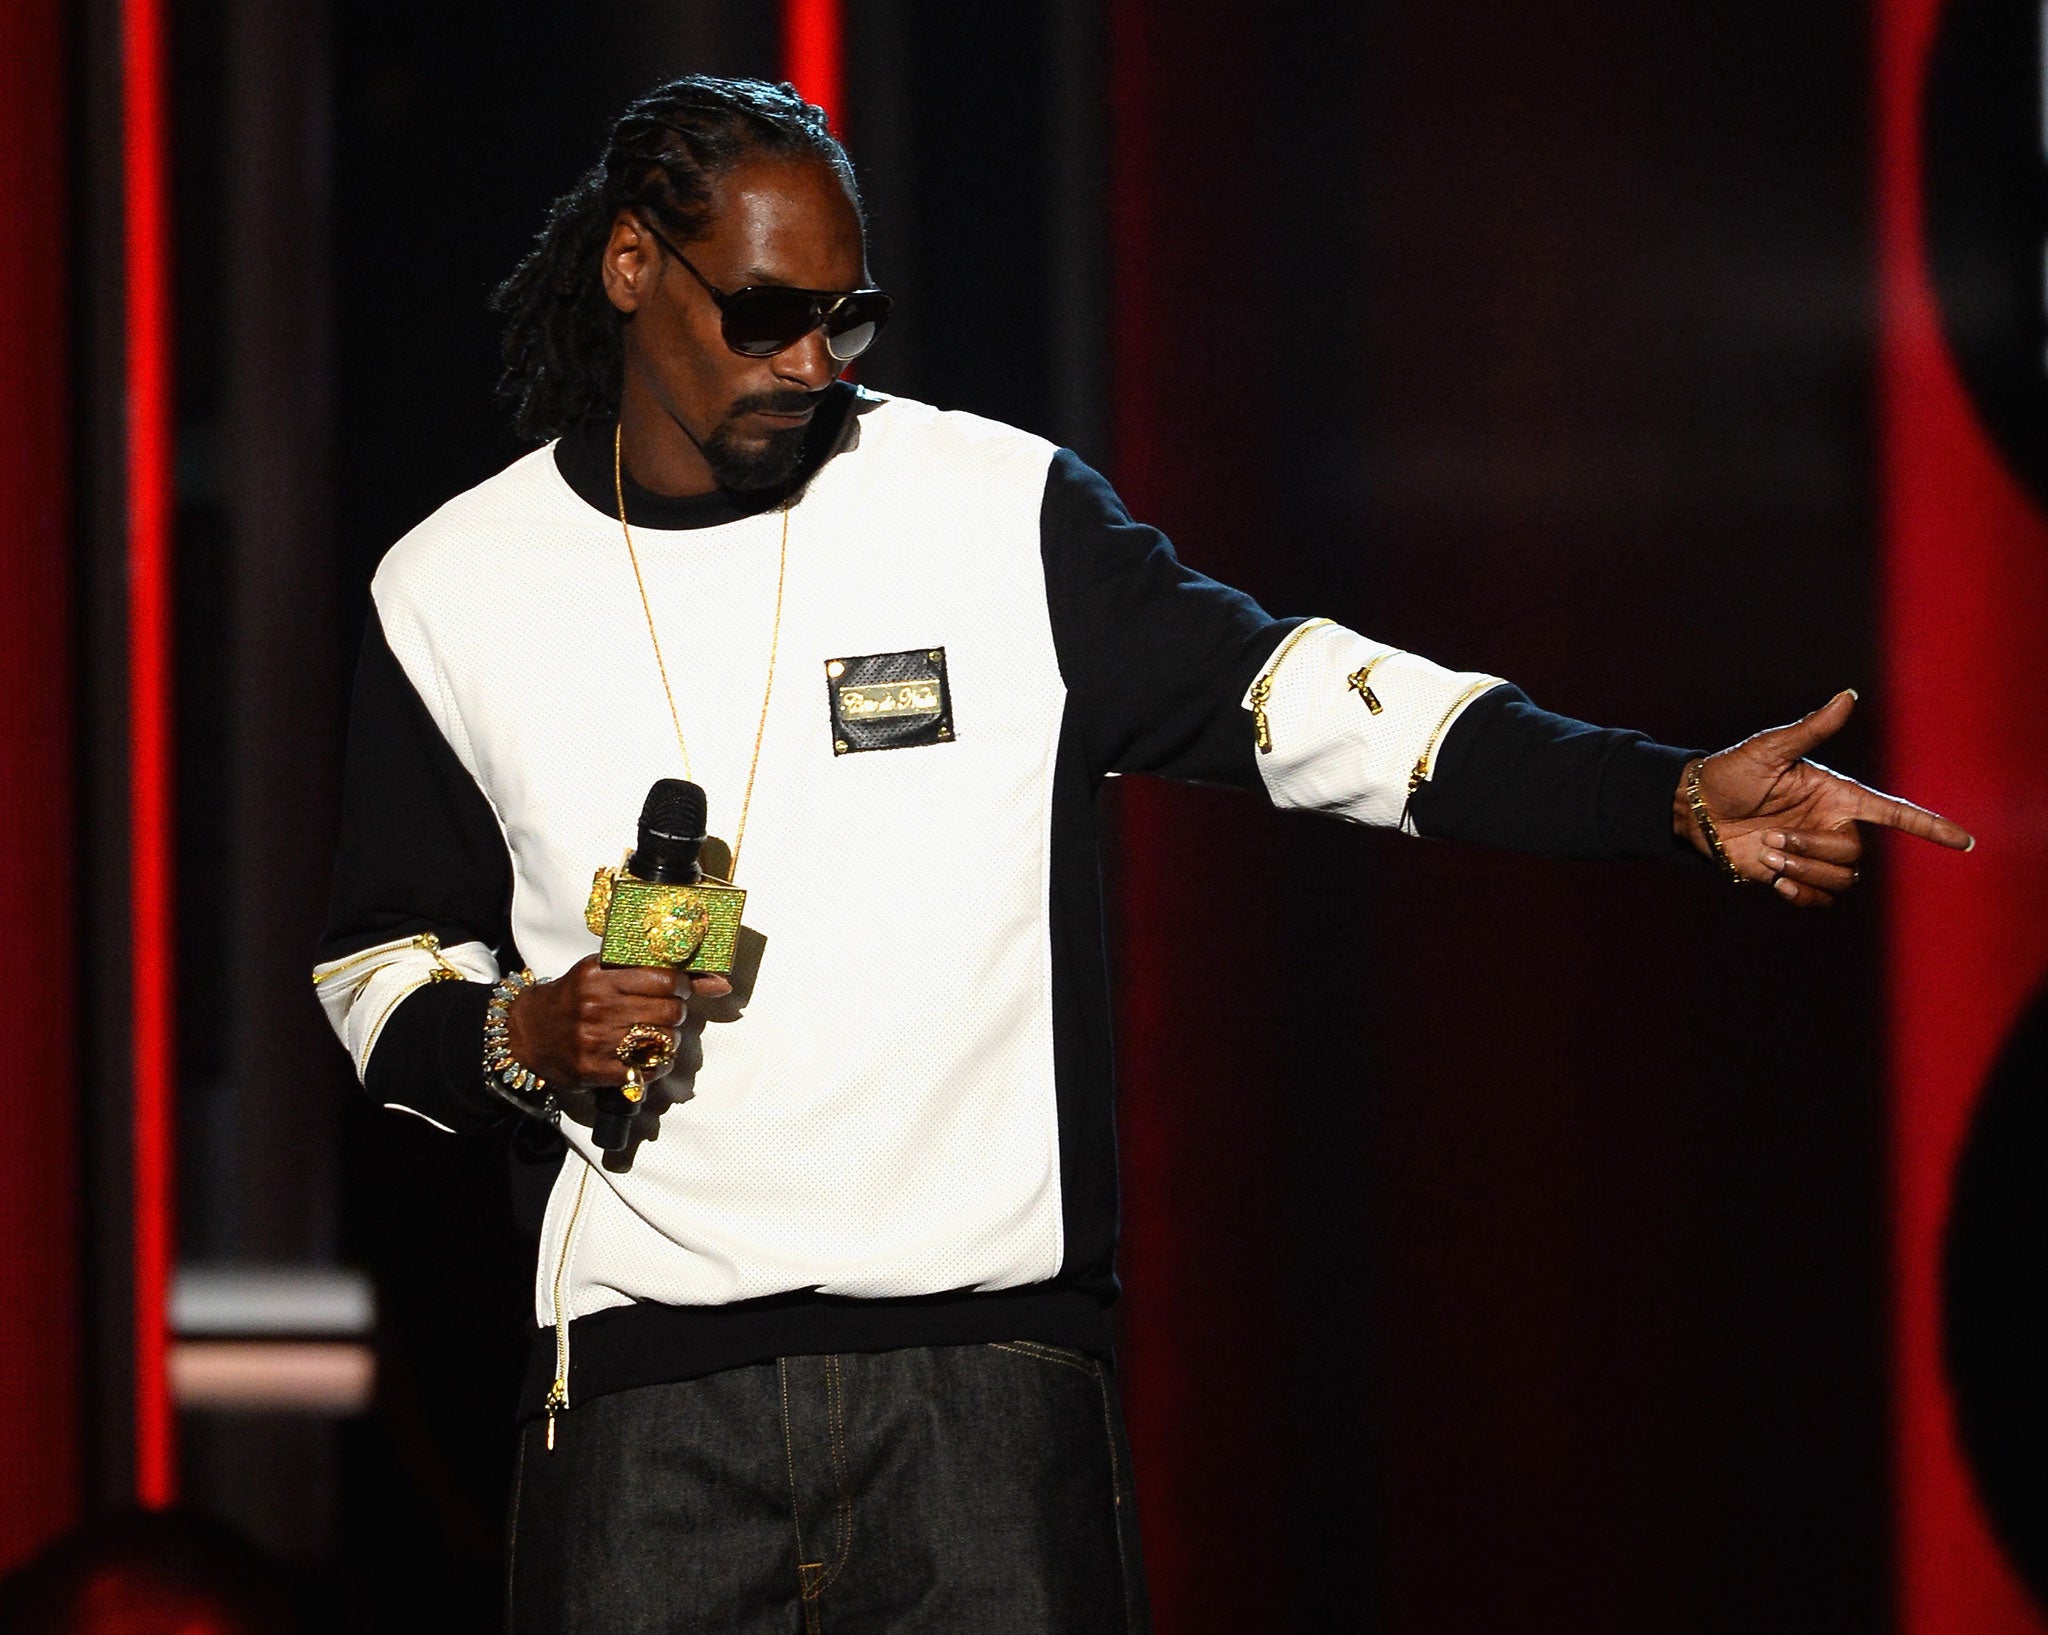 Snoop Dogg speaks onstage during the 2014 Billboard Music Awards at the MGM Grand Garden Arena on 18 May, 2014, in Las Vegas, Nevada